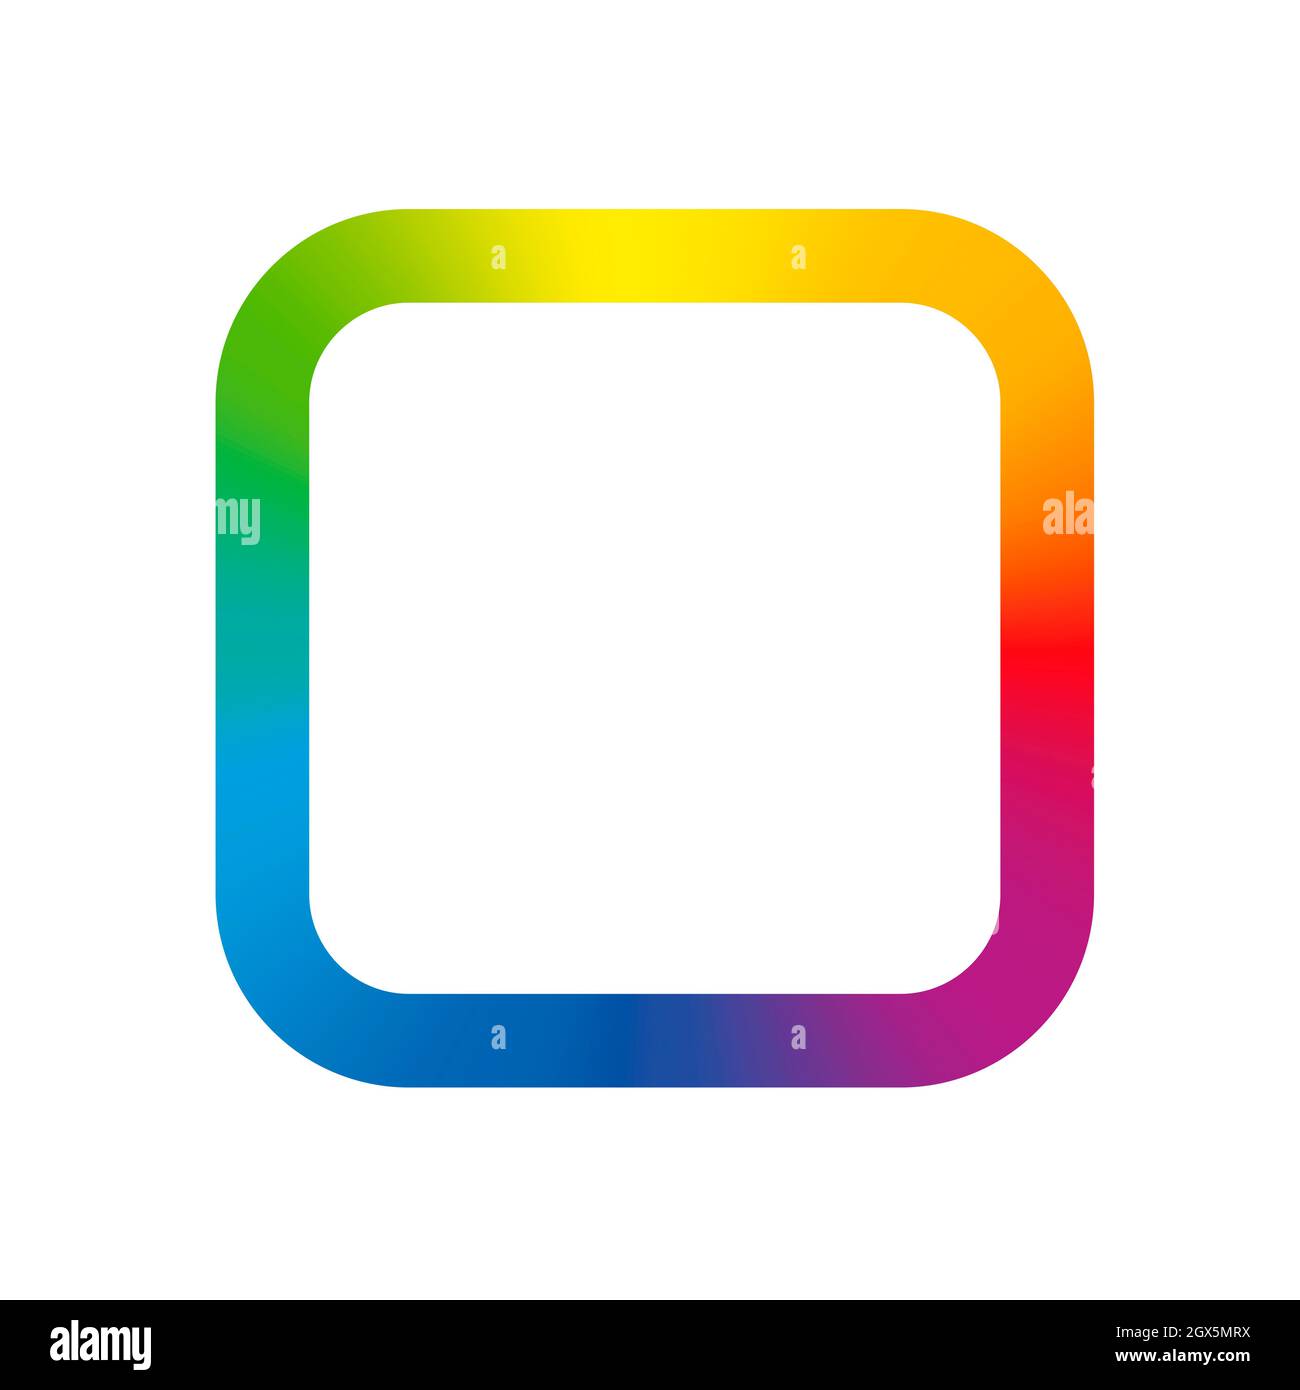 Rounded square, rainbow gradient colored squircle, colored app symbol, colorful frame with round corners - icon illustration on white background. Stock Photo